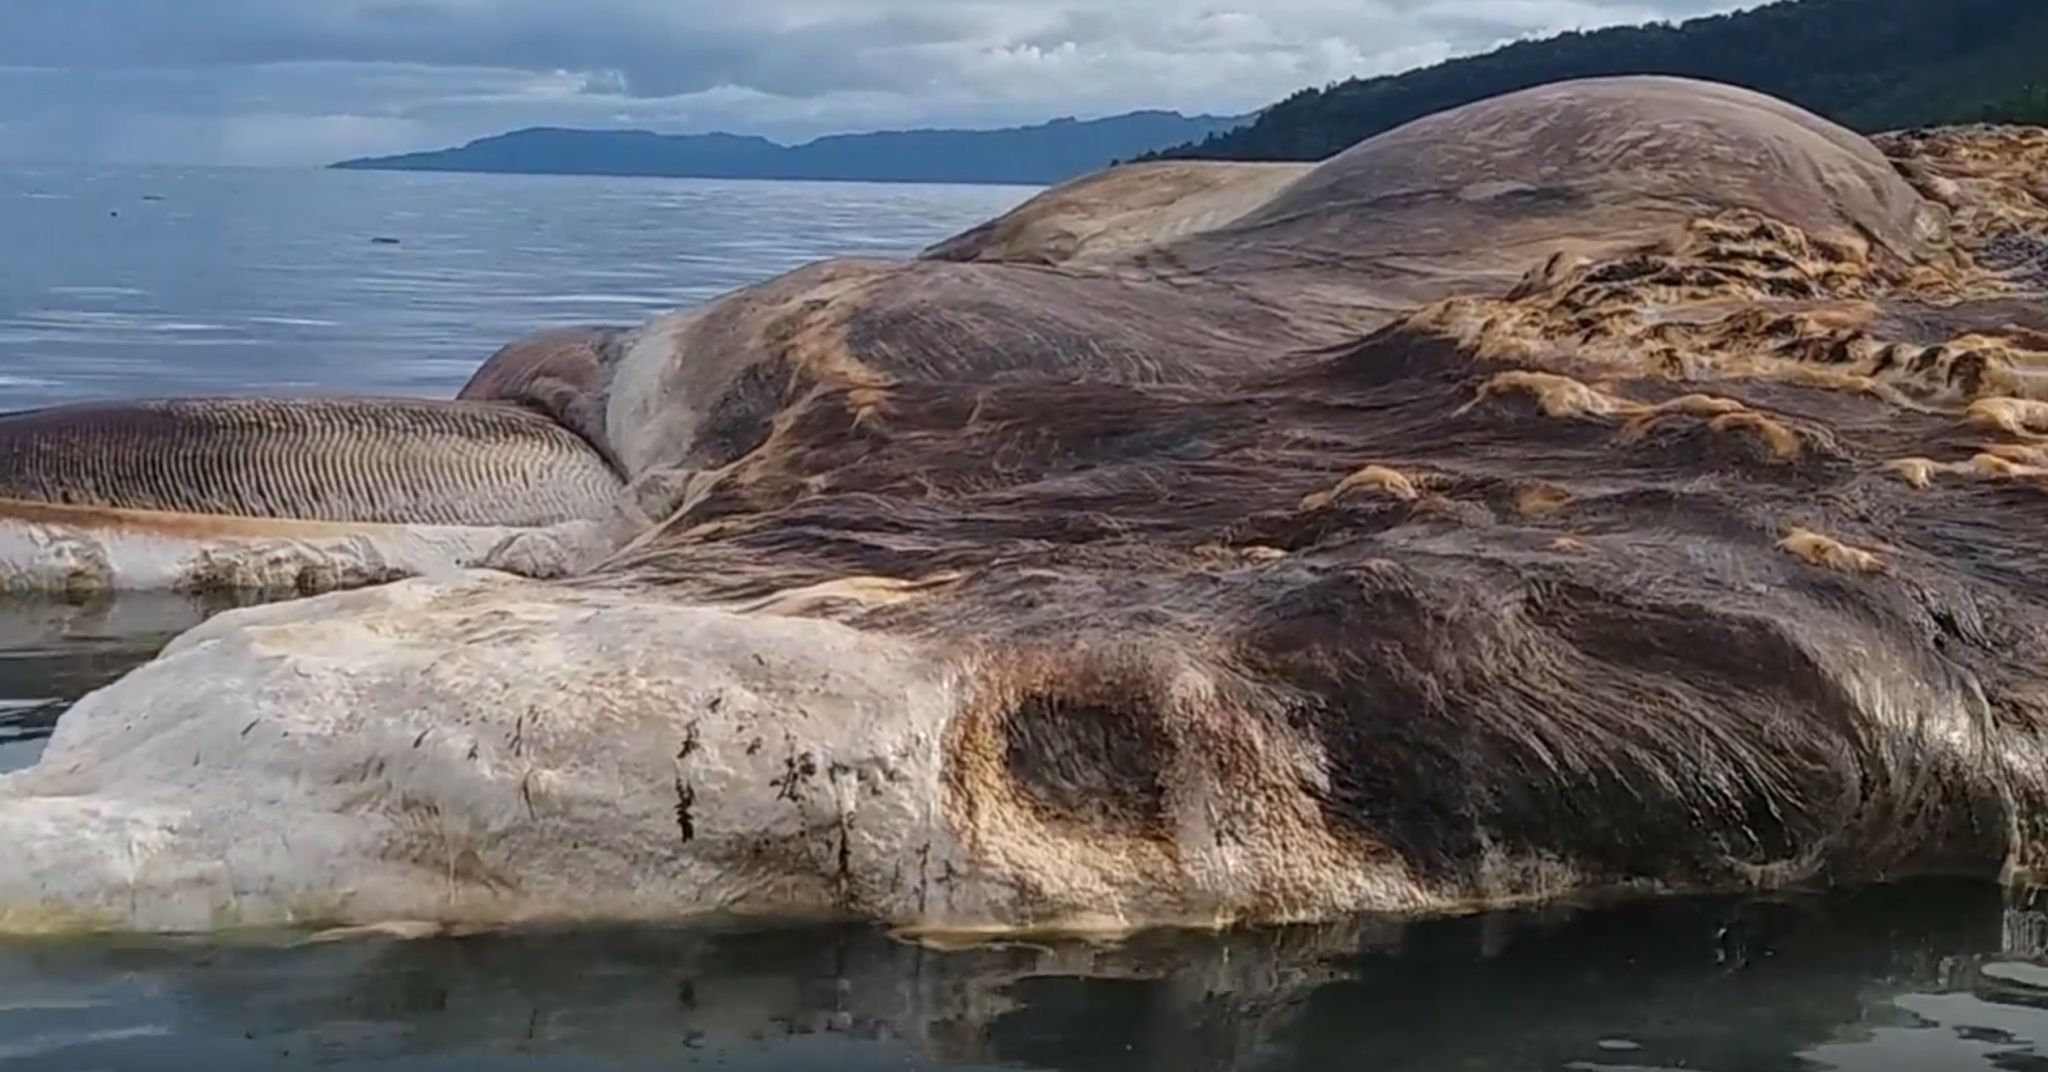 Scientists identify 50-foot creature that washed up on an Indonesian